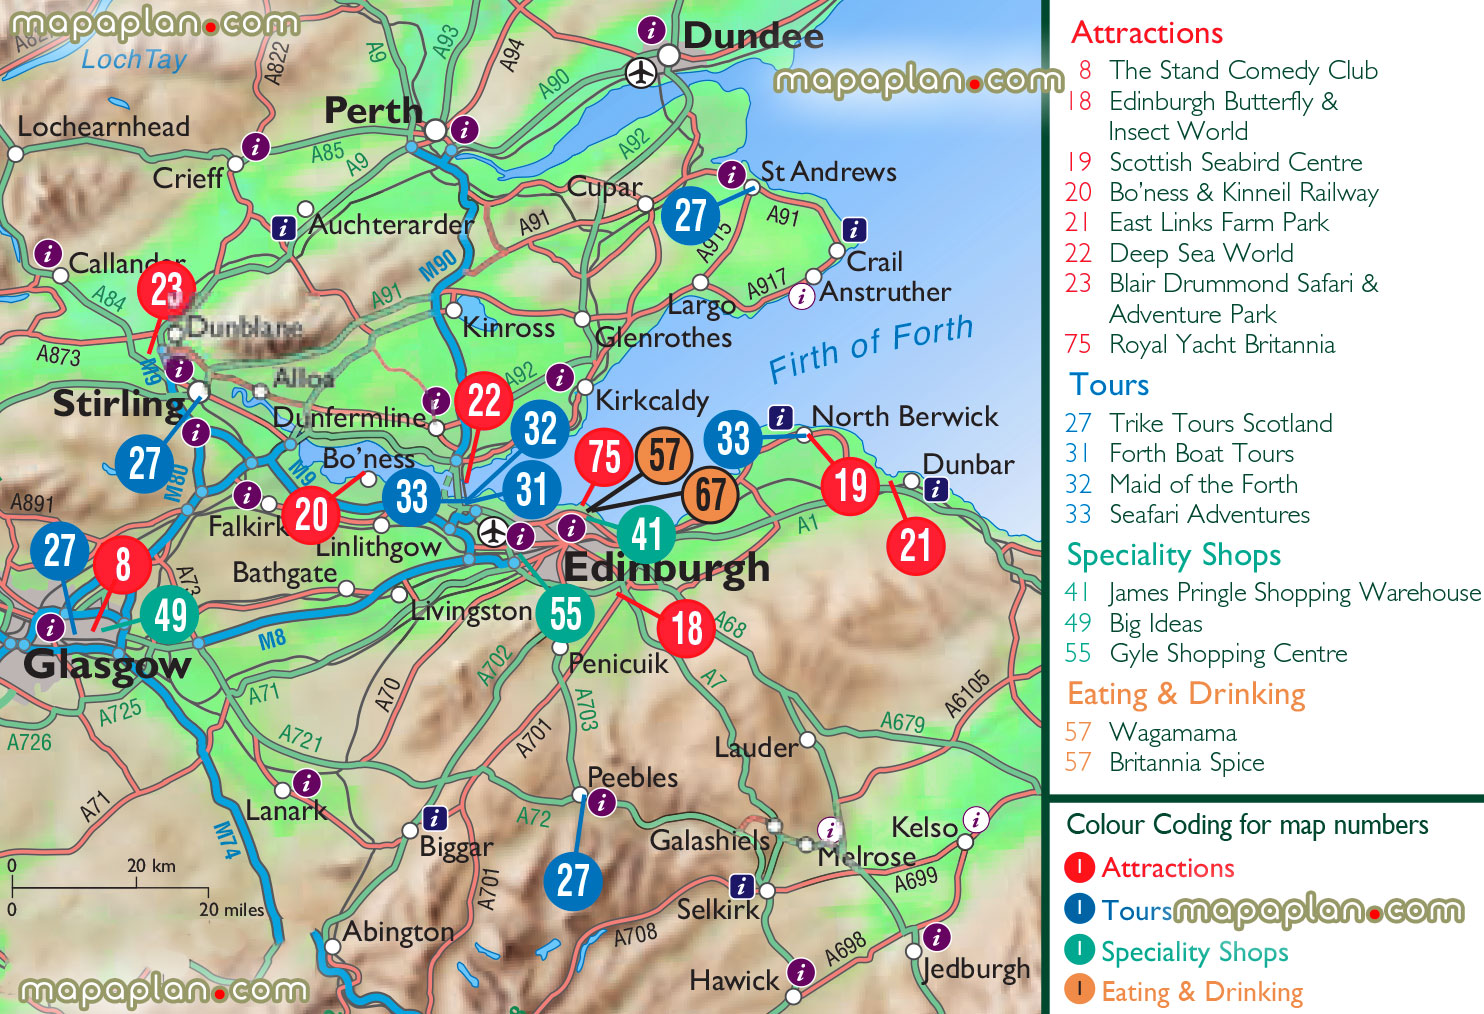 top attractions greater Edinburgh metro area scotland virtual surrounding area towns best historical buildings what see where go directions fun things do regions Edinburgh Top tourist attractions map